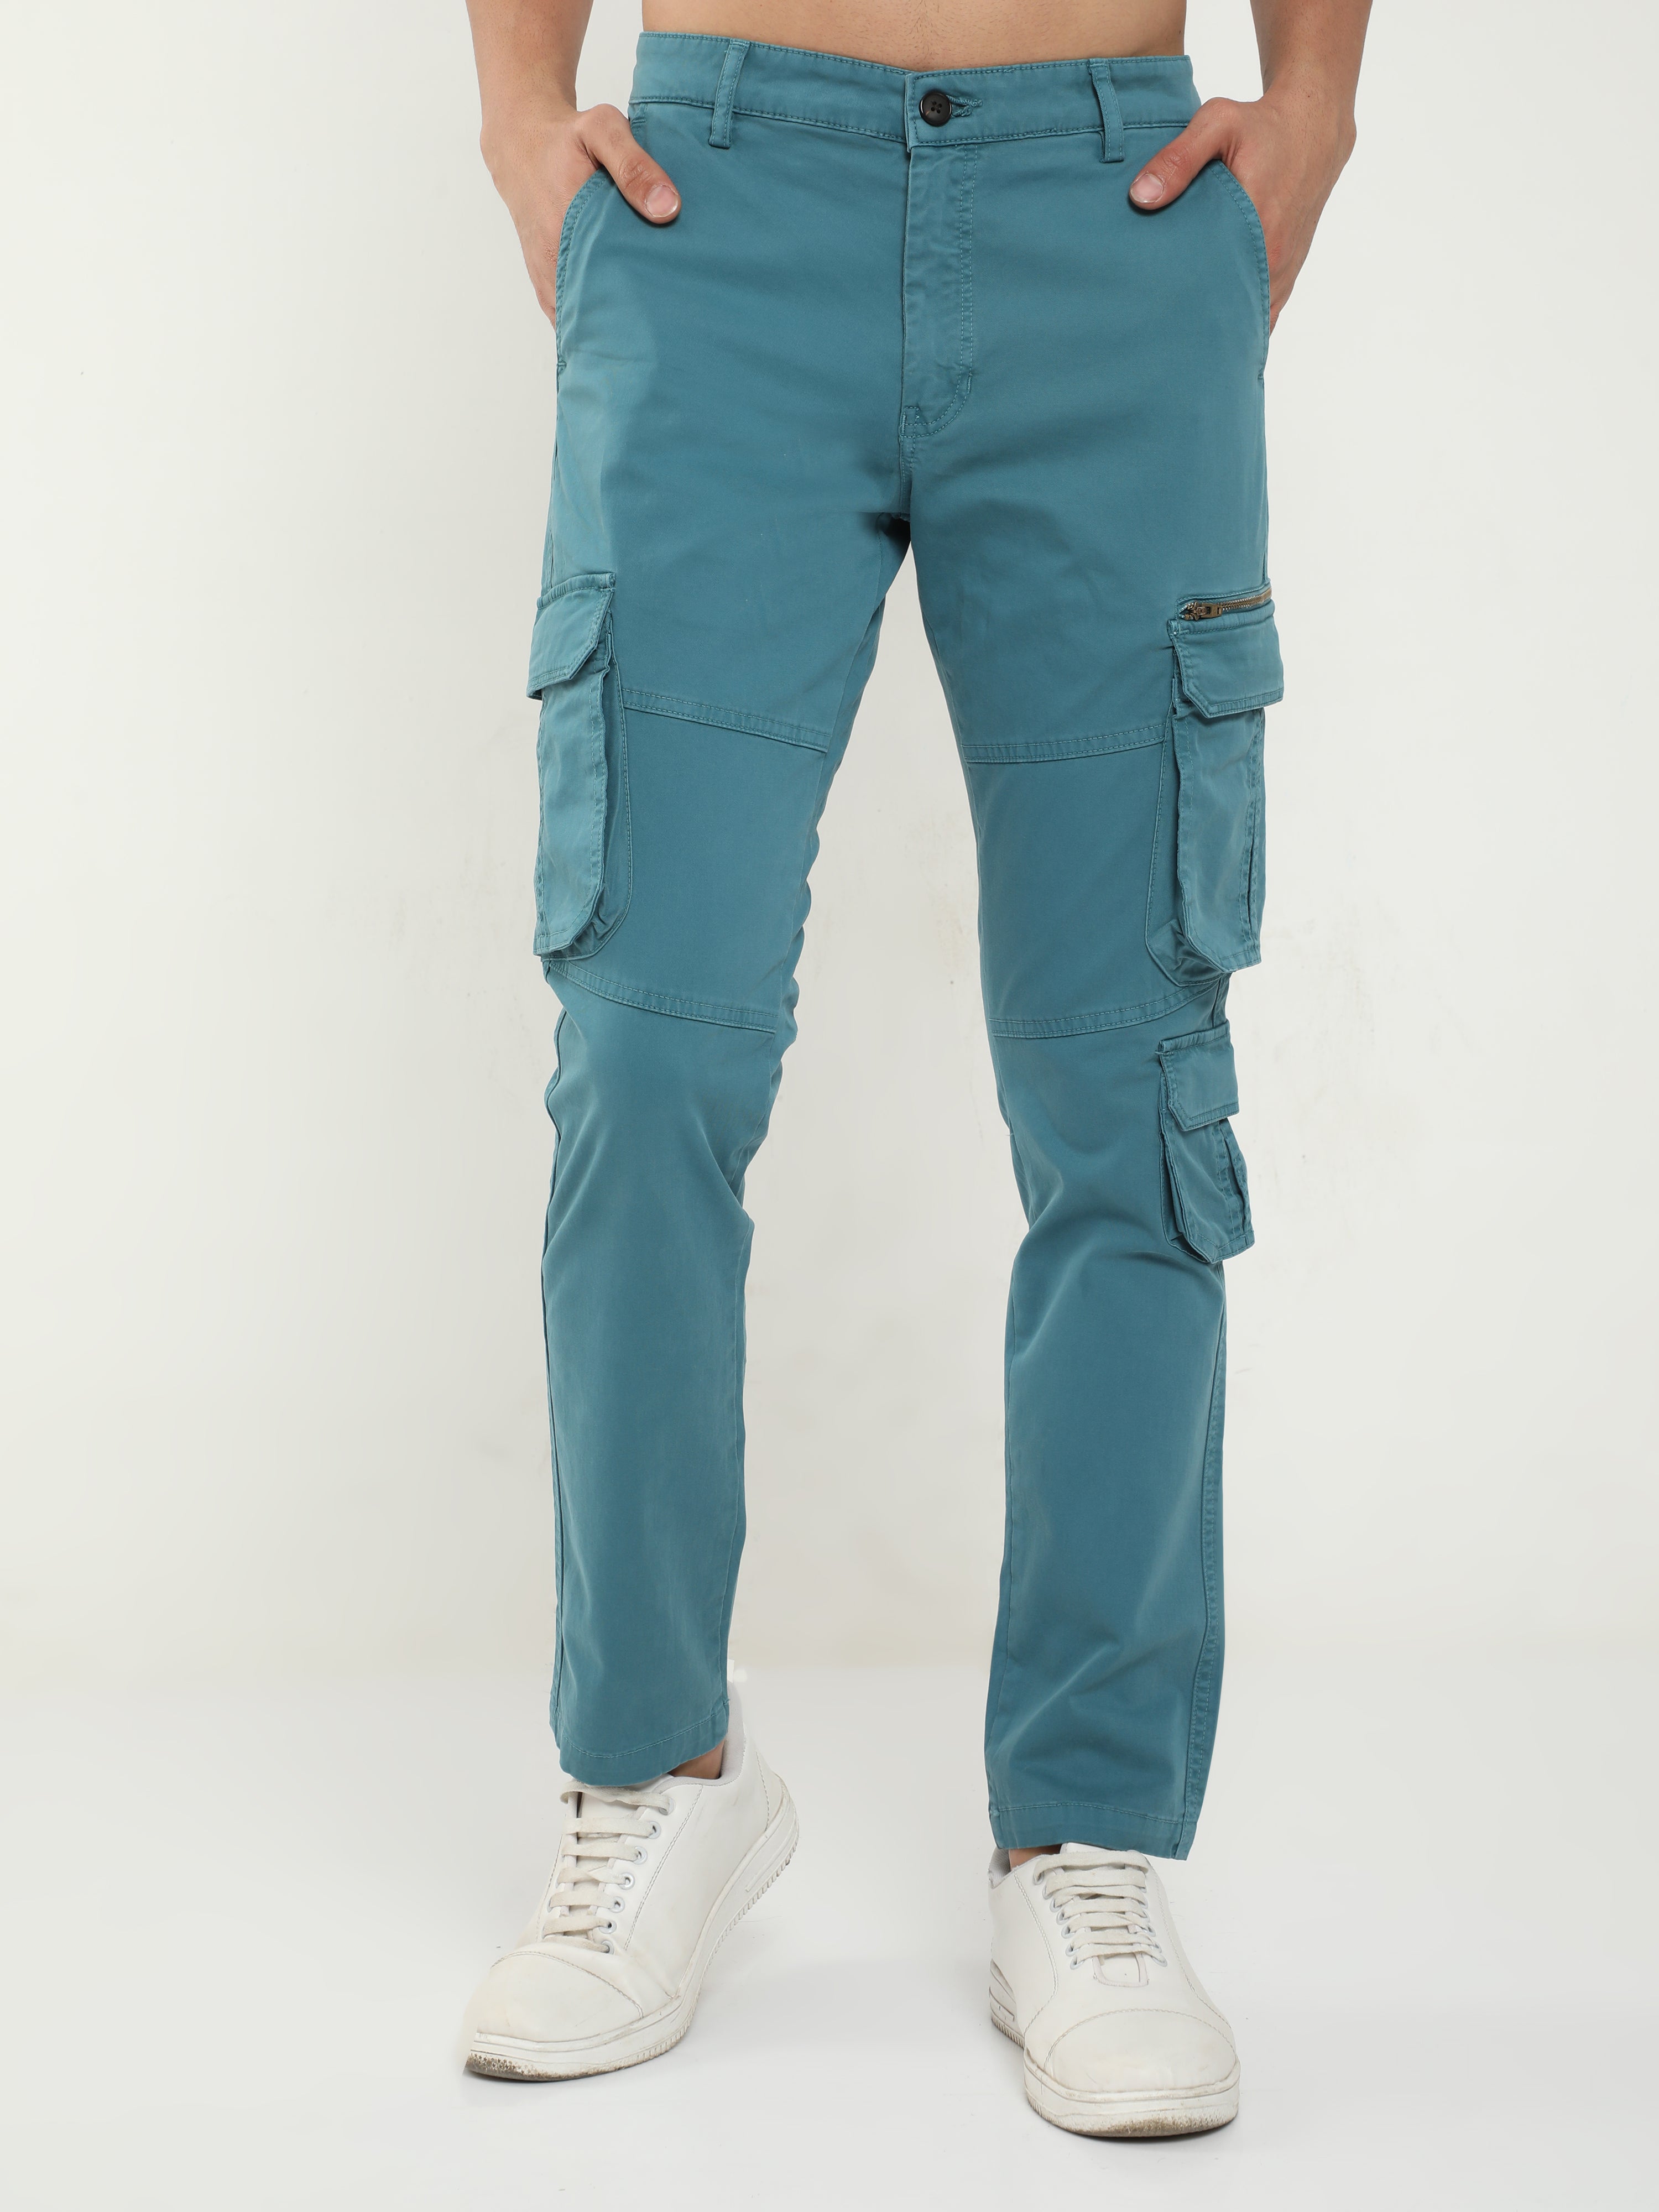 American Stitch Nylon Utility Cargo Stretch Pant - Men's Pants in Grey |  Buckle